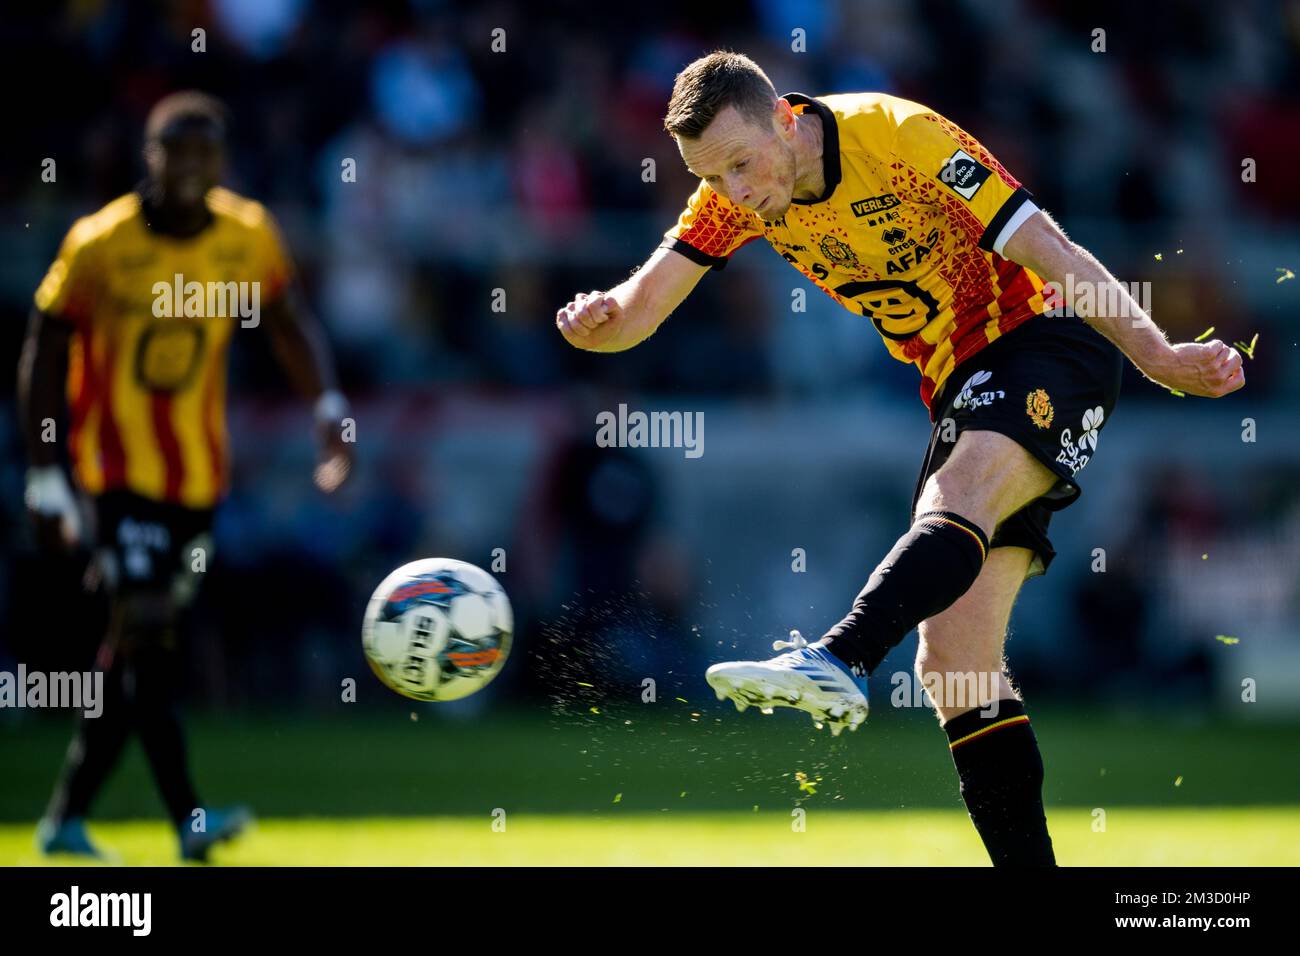 Mechelen's Rob Schoofs pictured in action during a soccer match between KV Mechelen and RSC Anderlecht, Sunday 09 October 2022 in Mechelen, on day 11 of the 2022-2023 'Jupiler Pro League' first division of the Belgian championship. BELGA PHOTO JASPER JACOBS Stock Photo